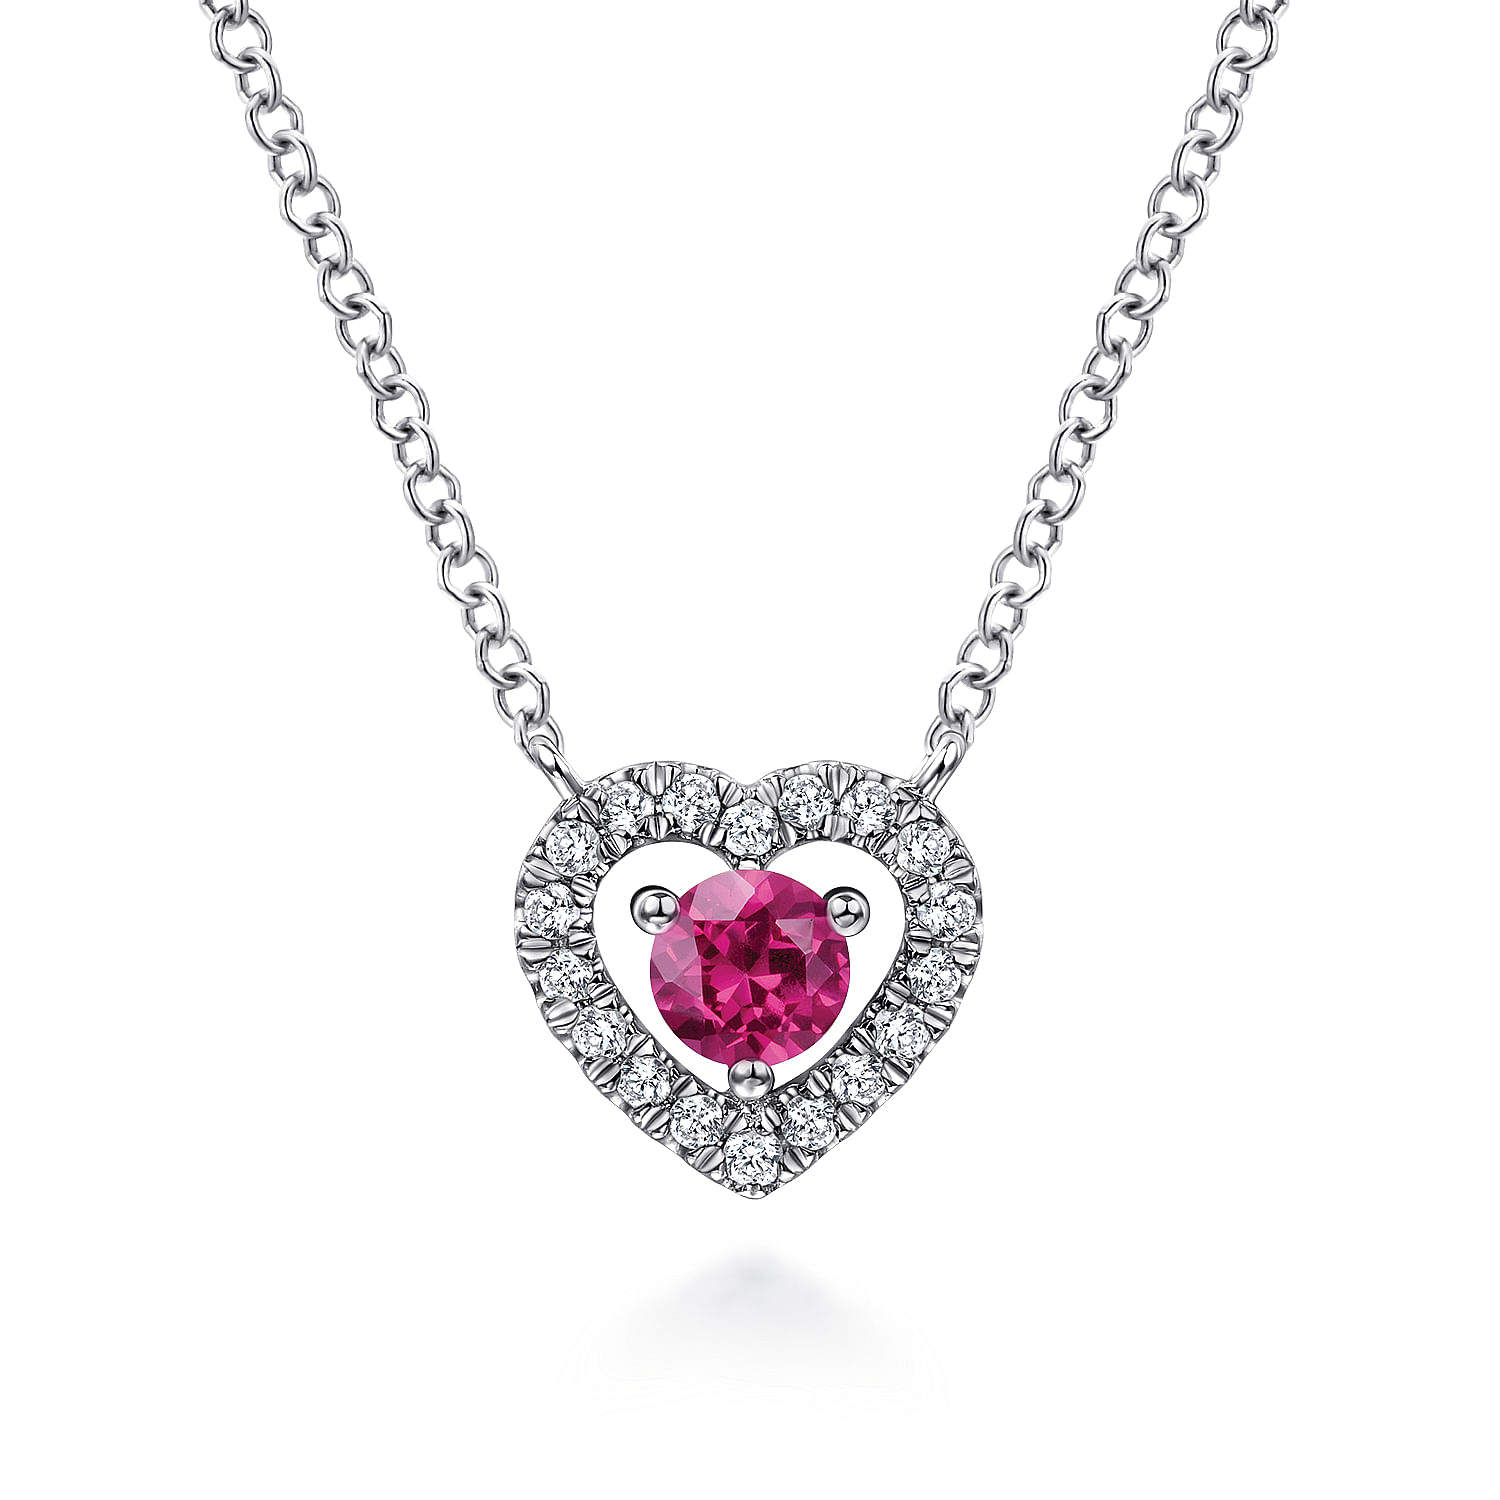 14K White Gold Round Ruby and Diamond Heart Pendant Necklace